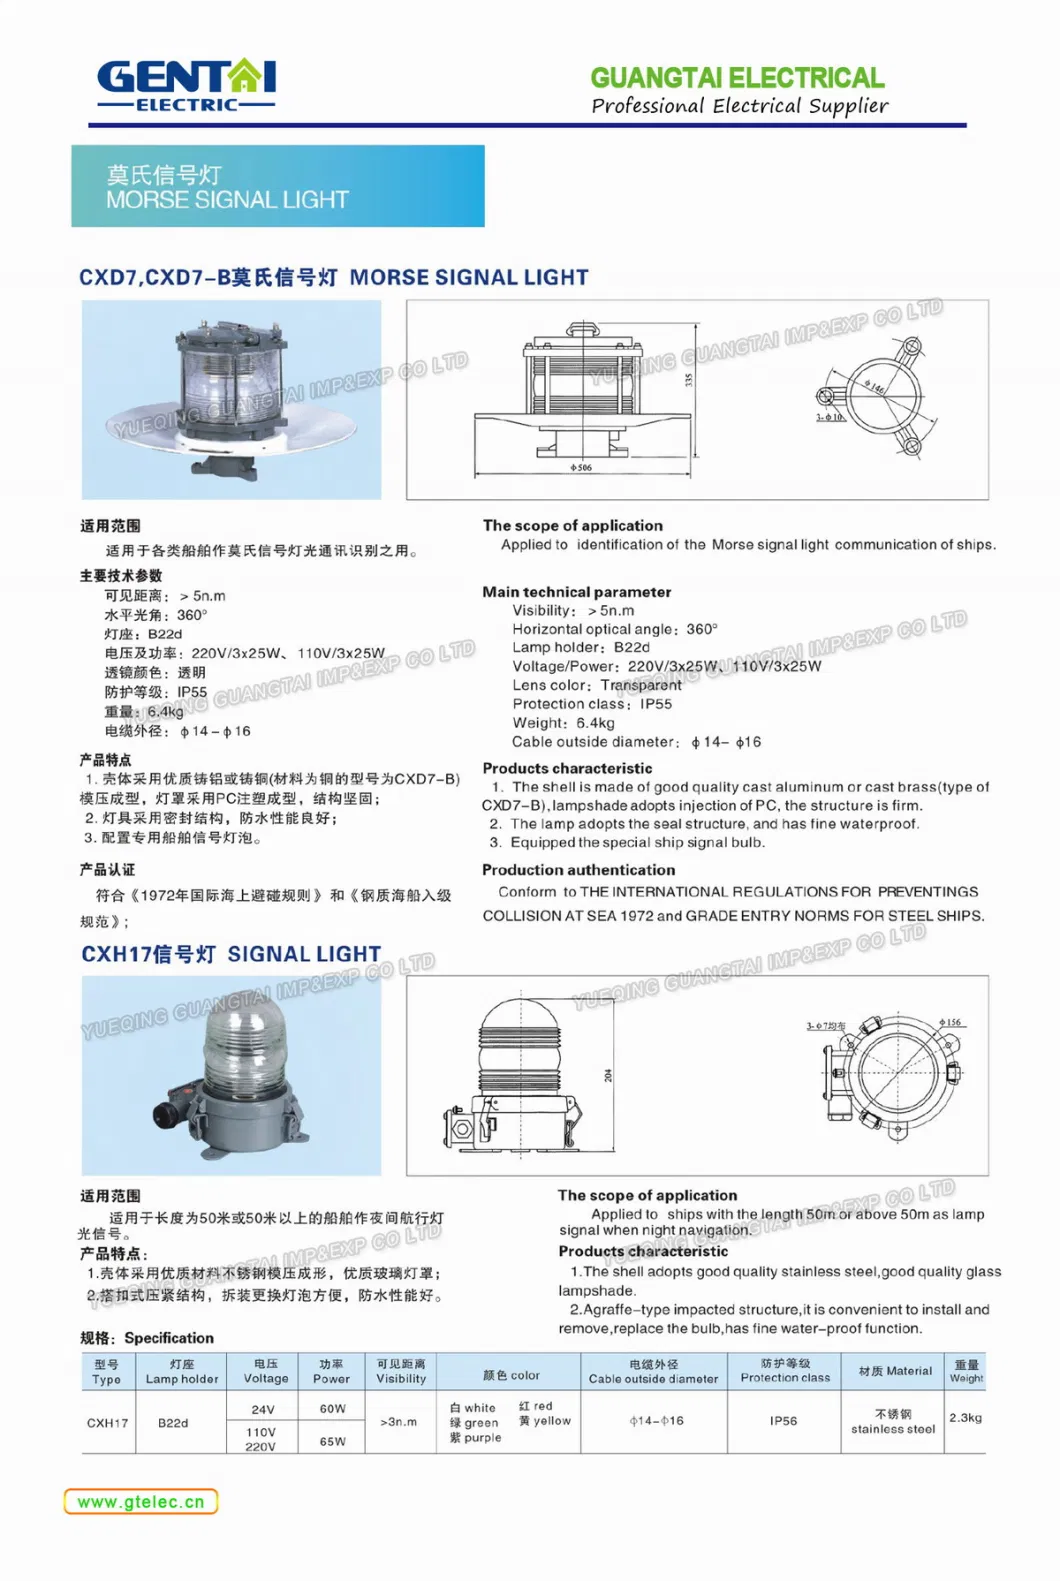 Best Quality Cxh13 Flagpole Light for Ship